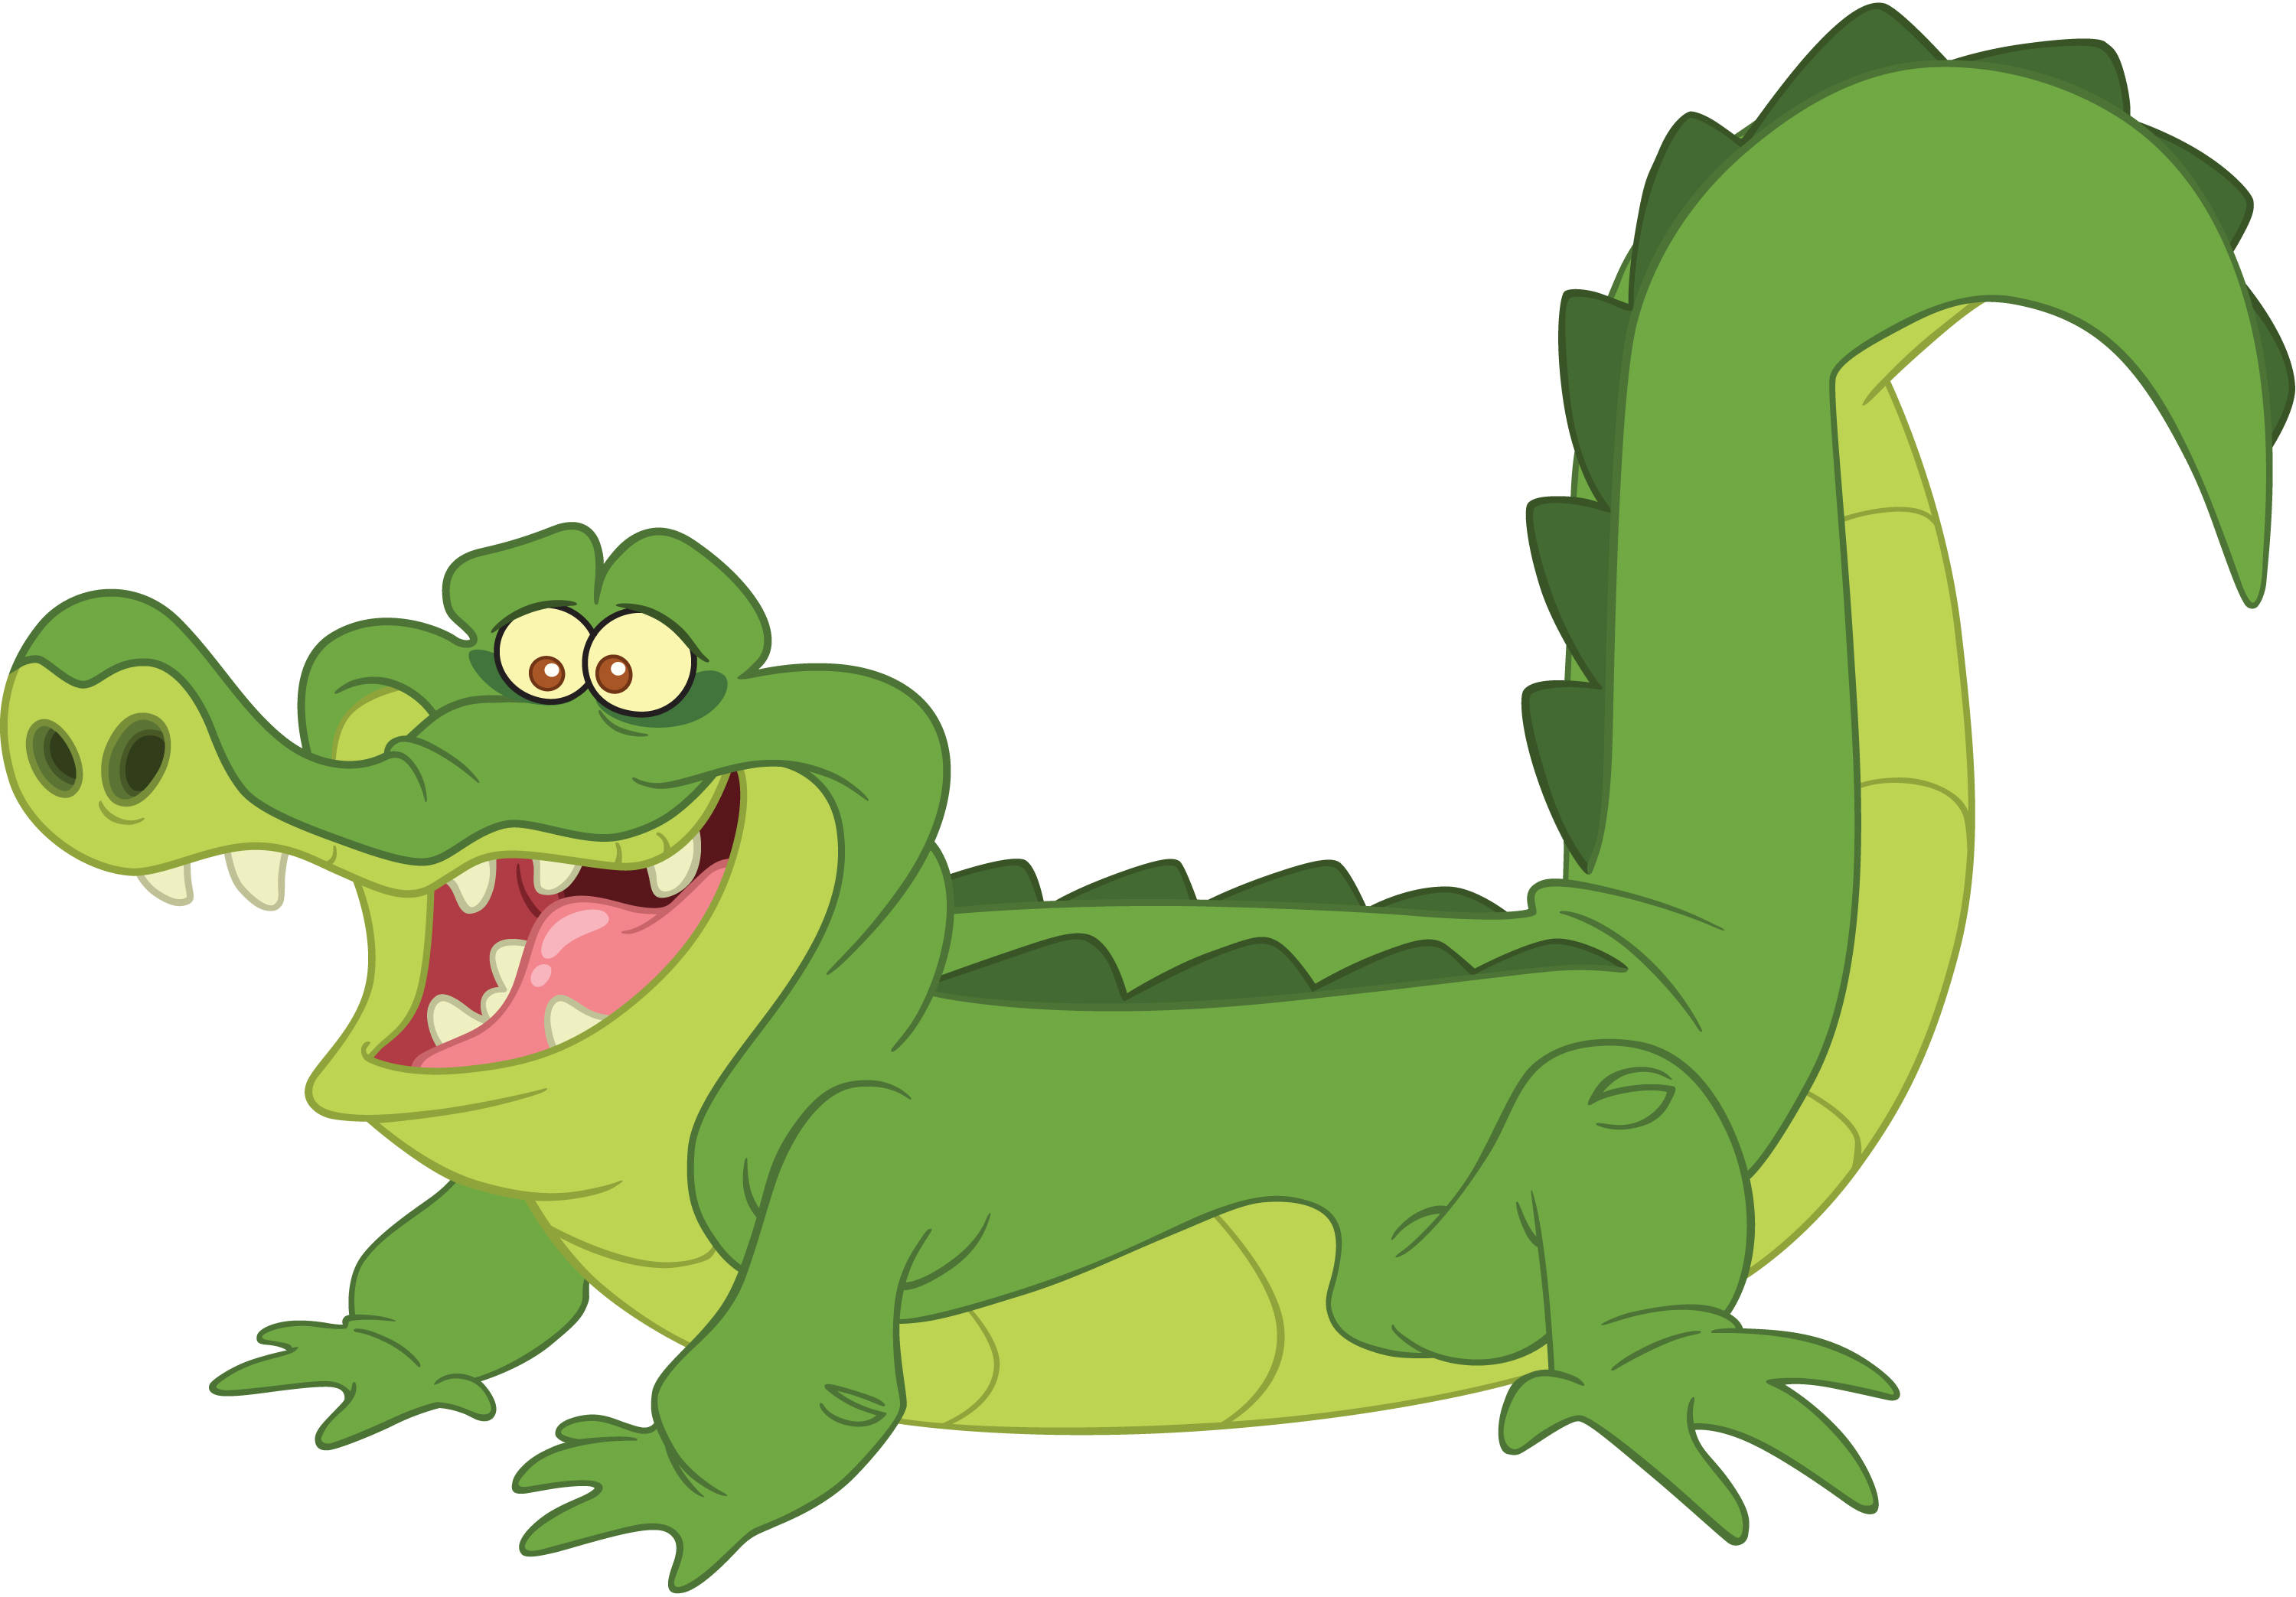 Crocodile In Water Clipart   Clipart Panda   Free Clipart Images